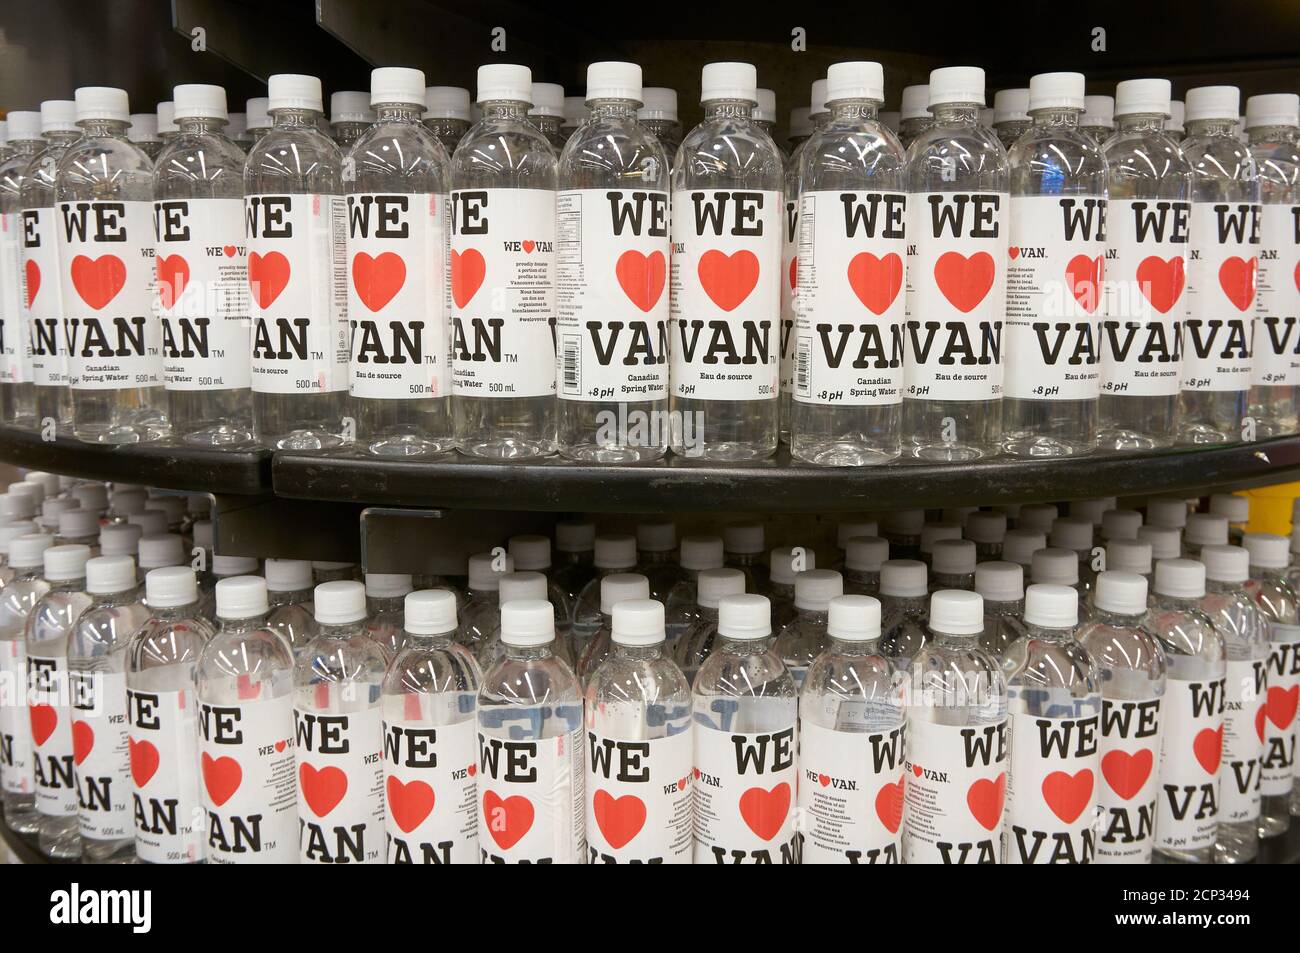 Plastic bottles of Canadian spring water lined up on a supermarket shelf in Vanvouver, British Columbia, Canada Stock Photo